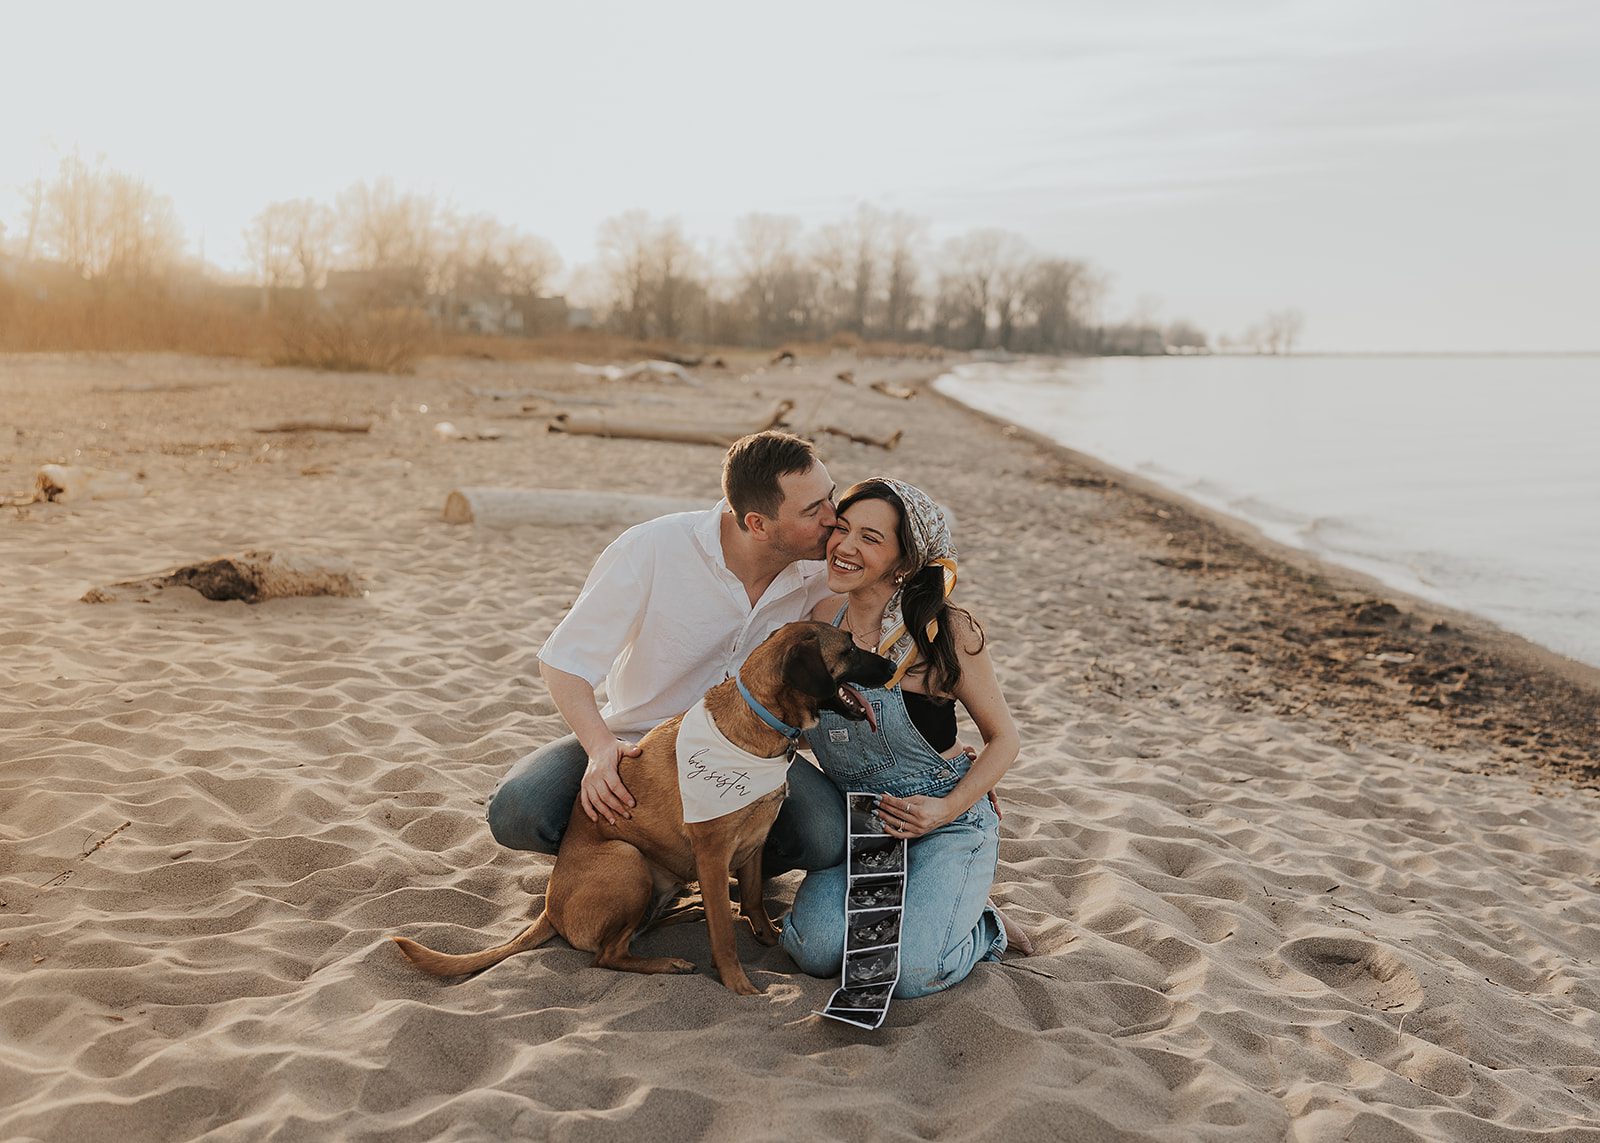 boho couple sitting on the beach with their dog while holding a baby sonogram photo announcing their pregnancy